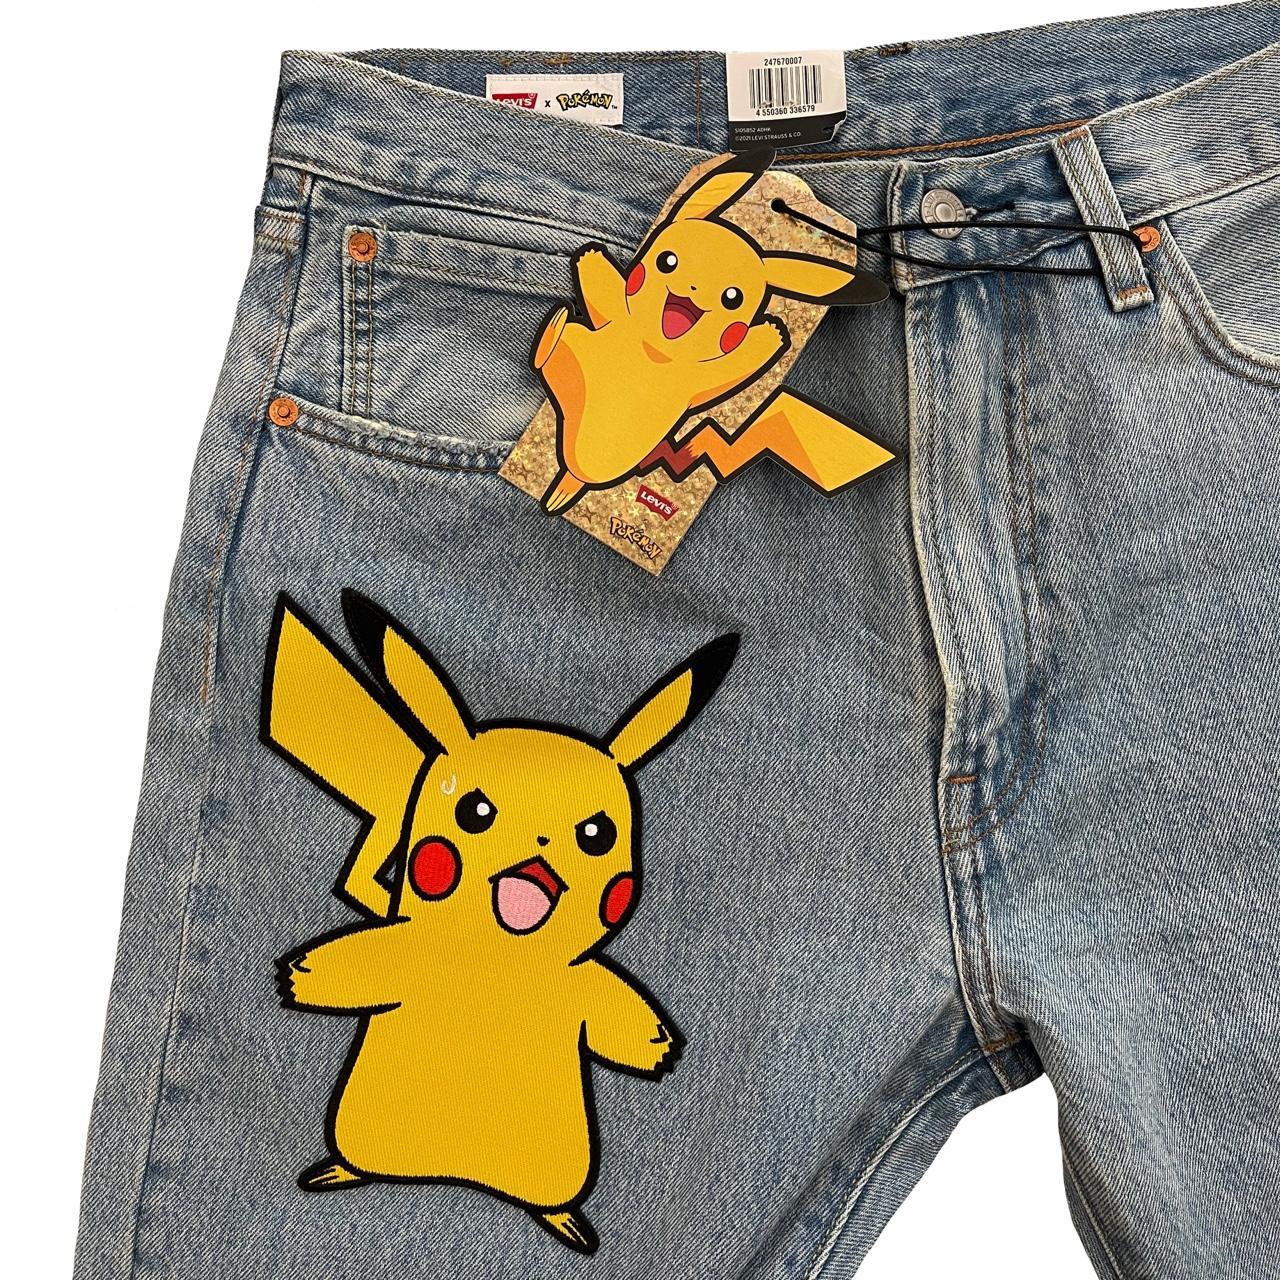 Levi's Pikachu Jeans – The Holy Grail